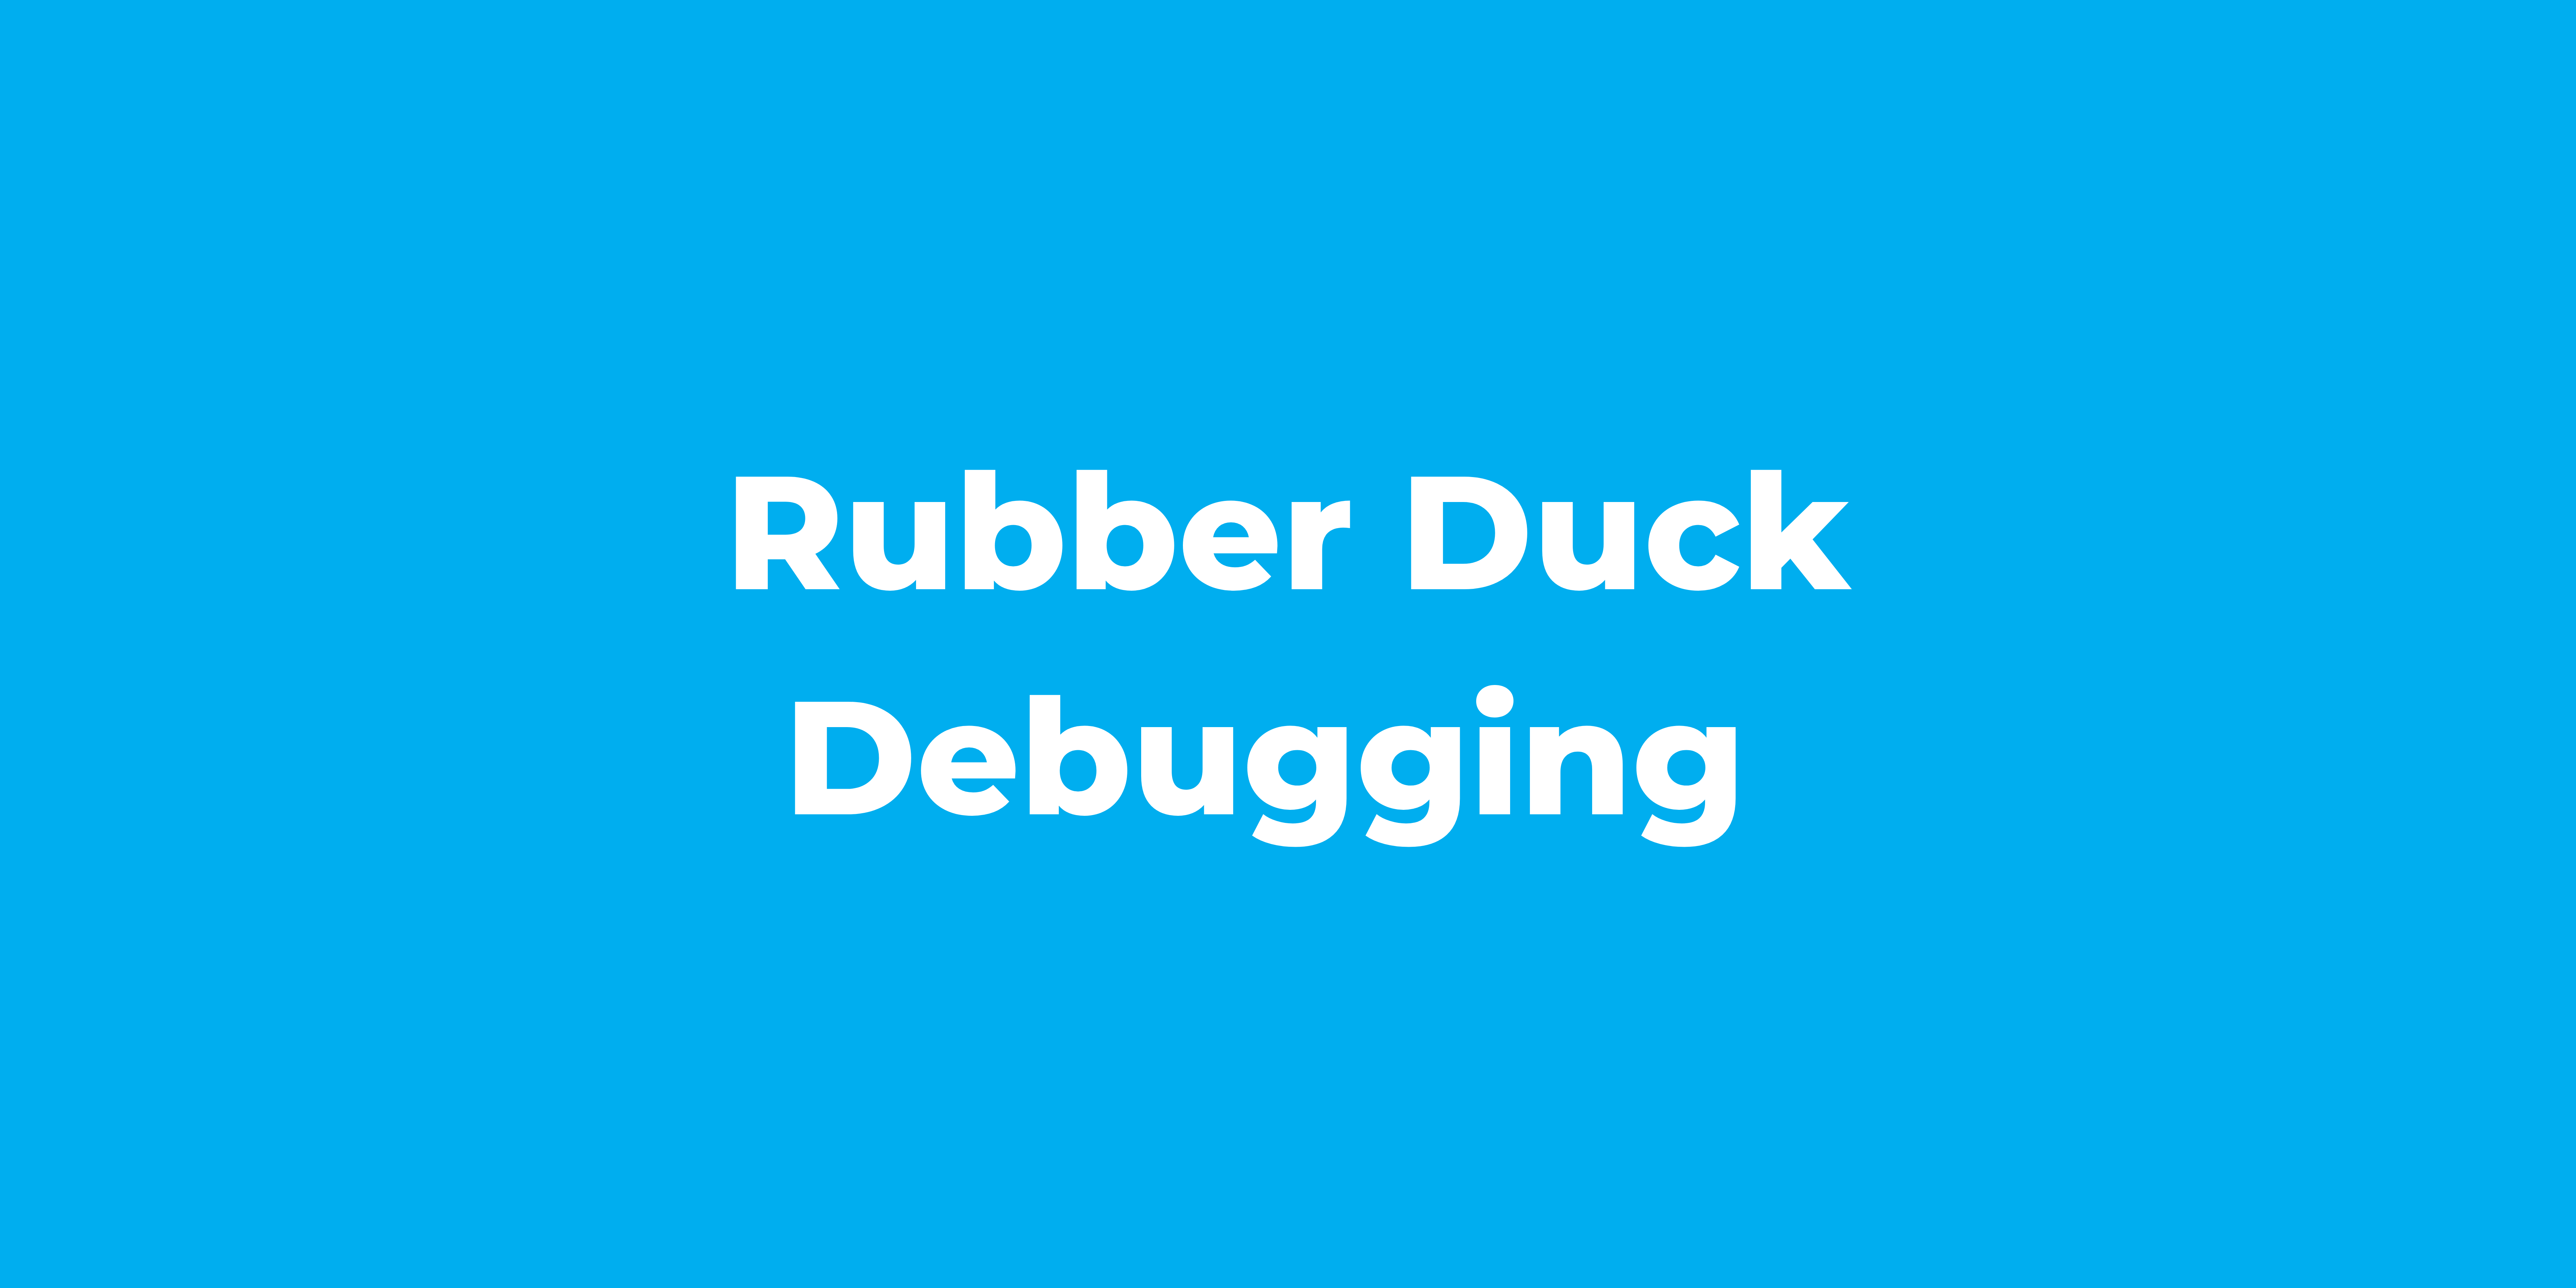 Rubber Duck Debussing